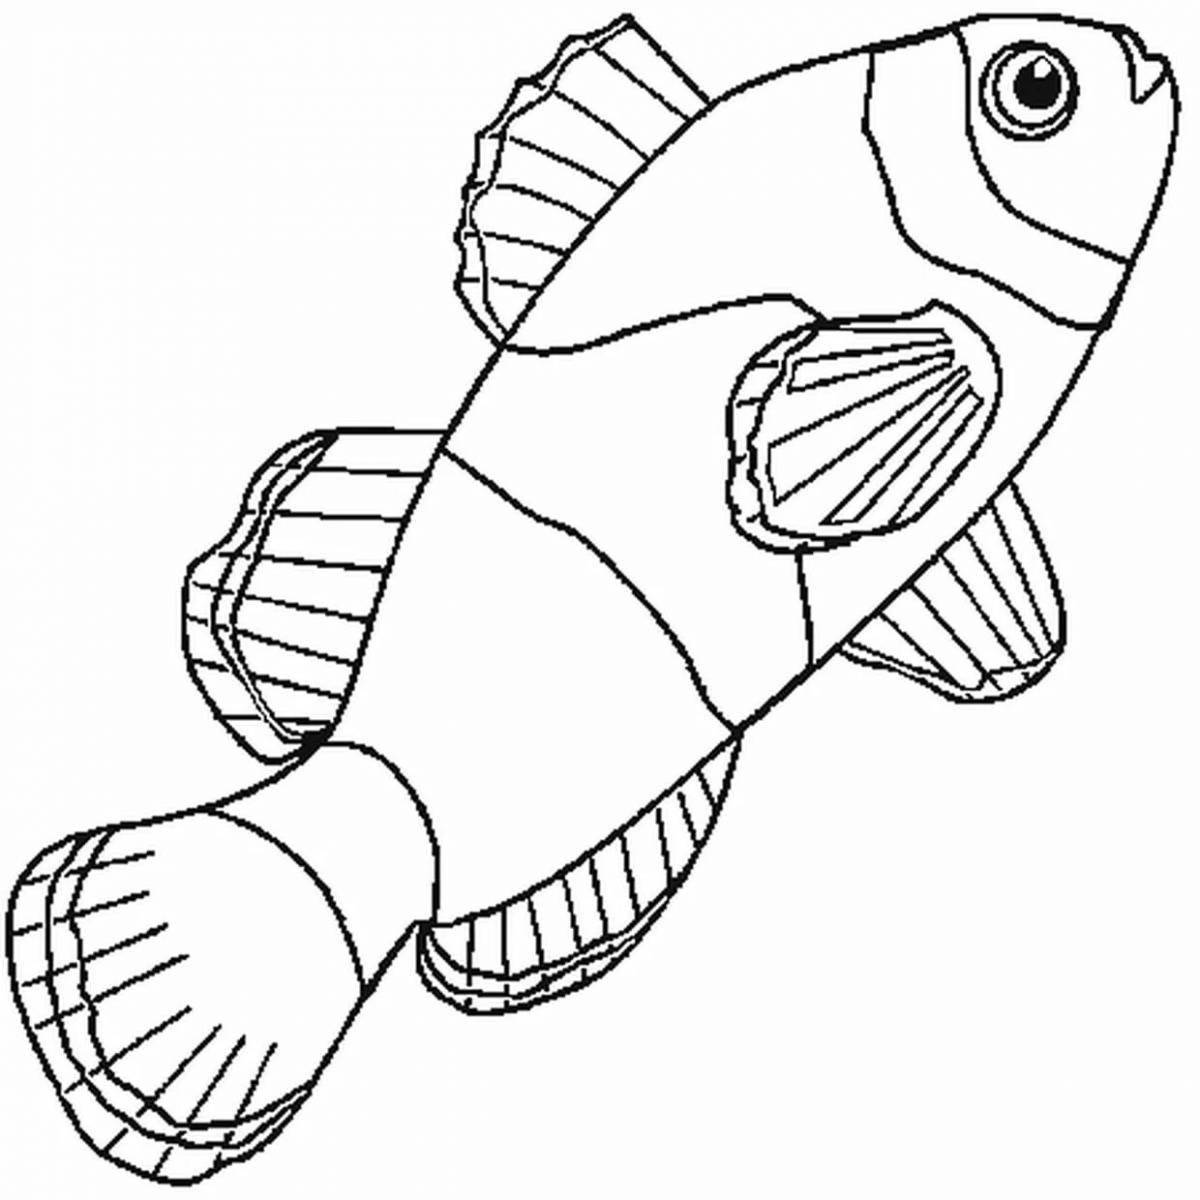 Playful drawing of a clown fish